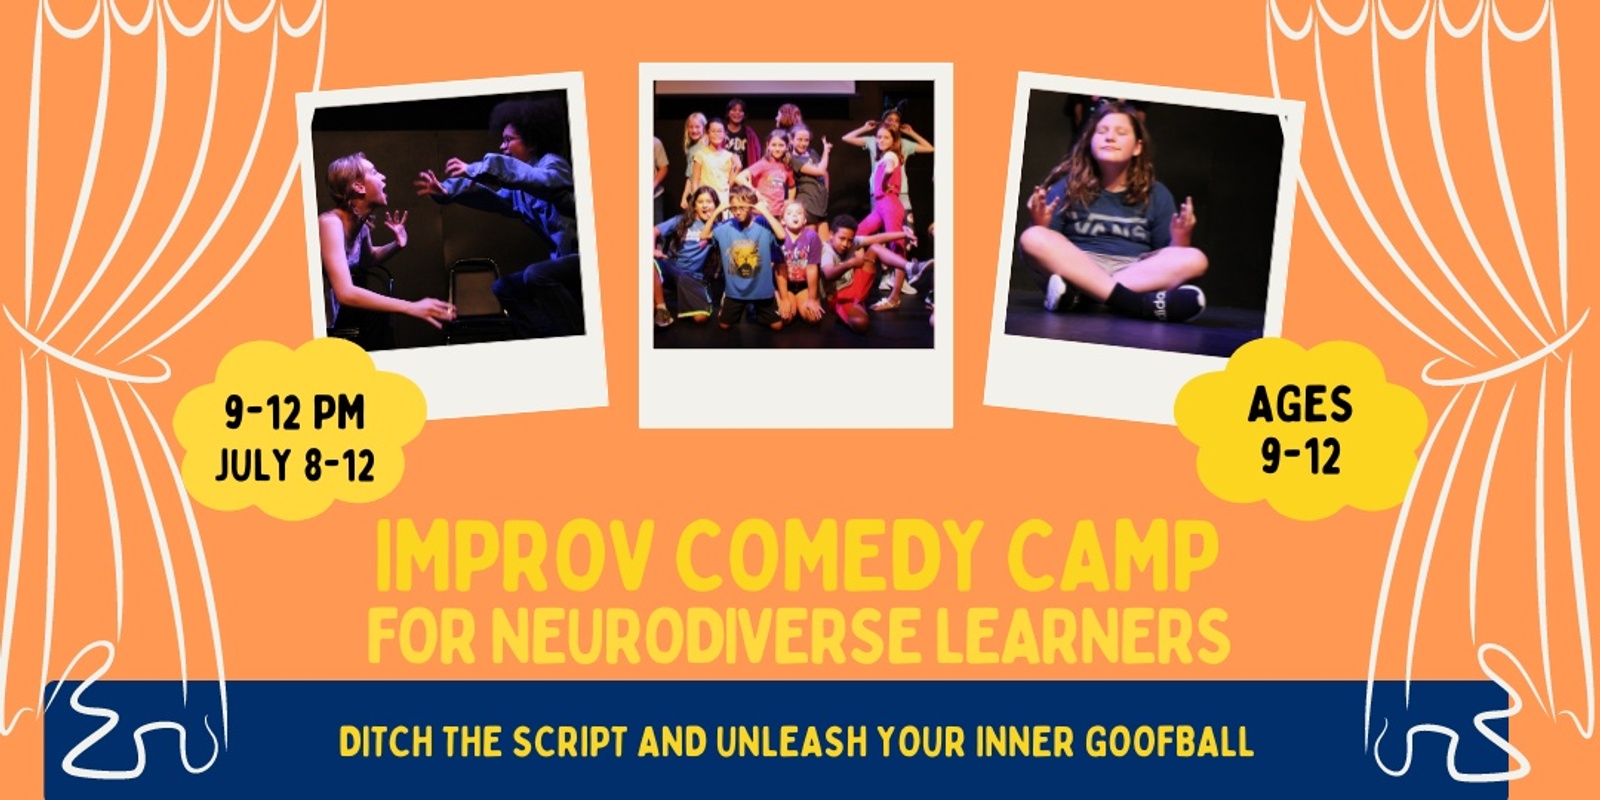 Banner image for Improv Comedy Camp for Neurodiverse Learners (Ages 9-12)